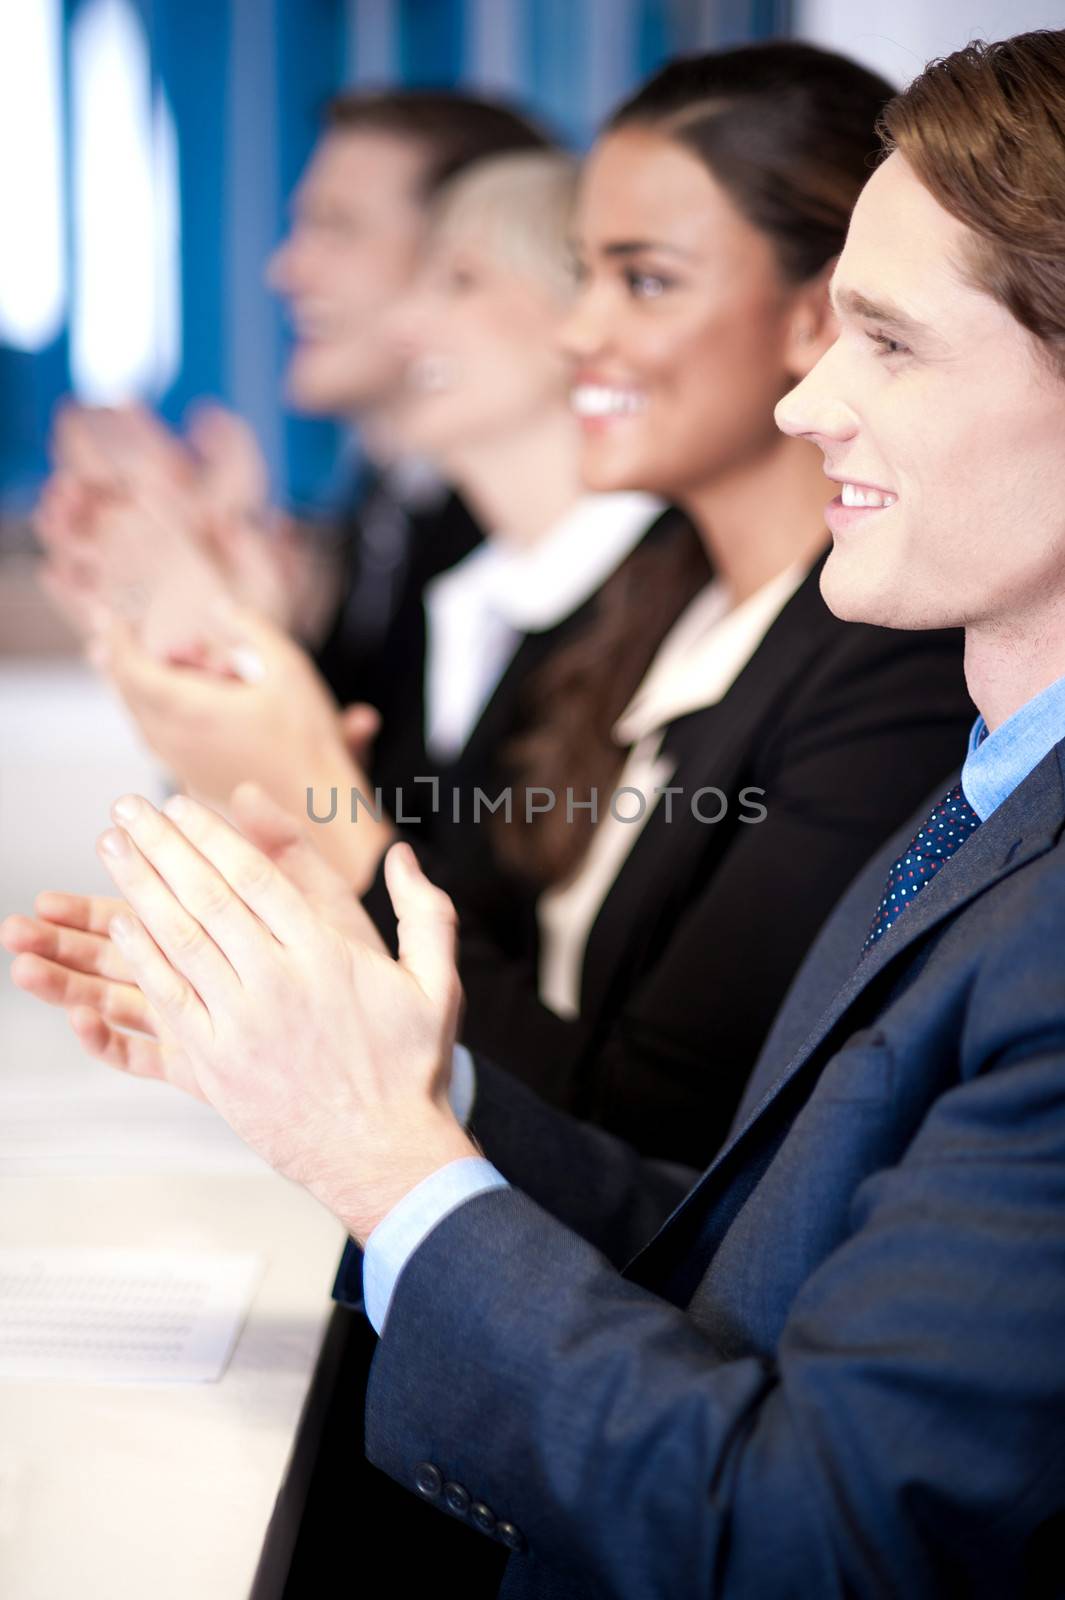 Team of four corporates applauding by stockyimages